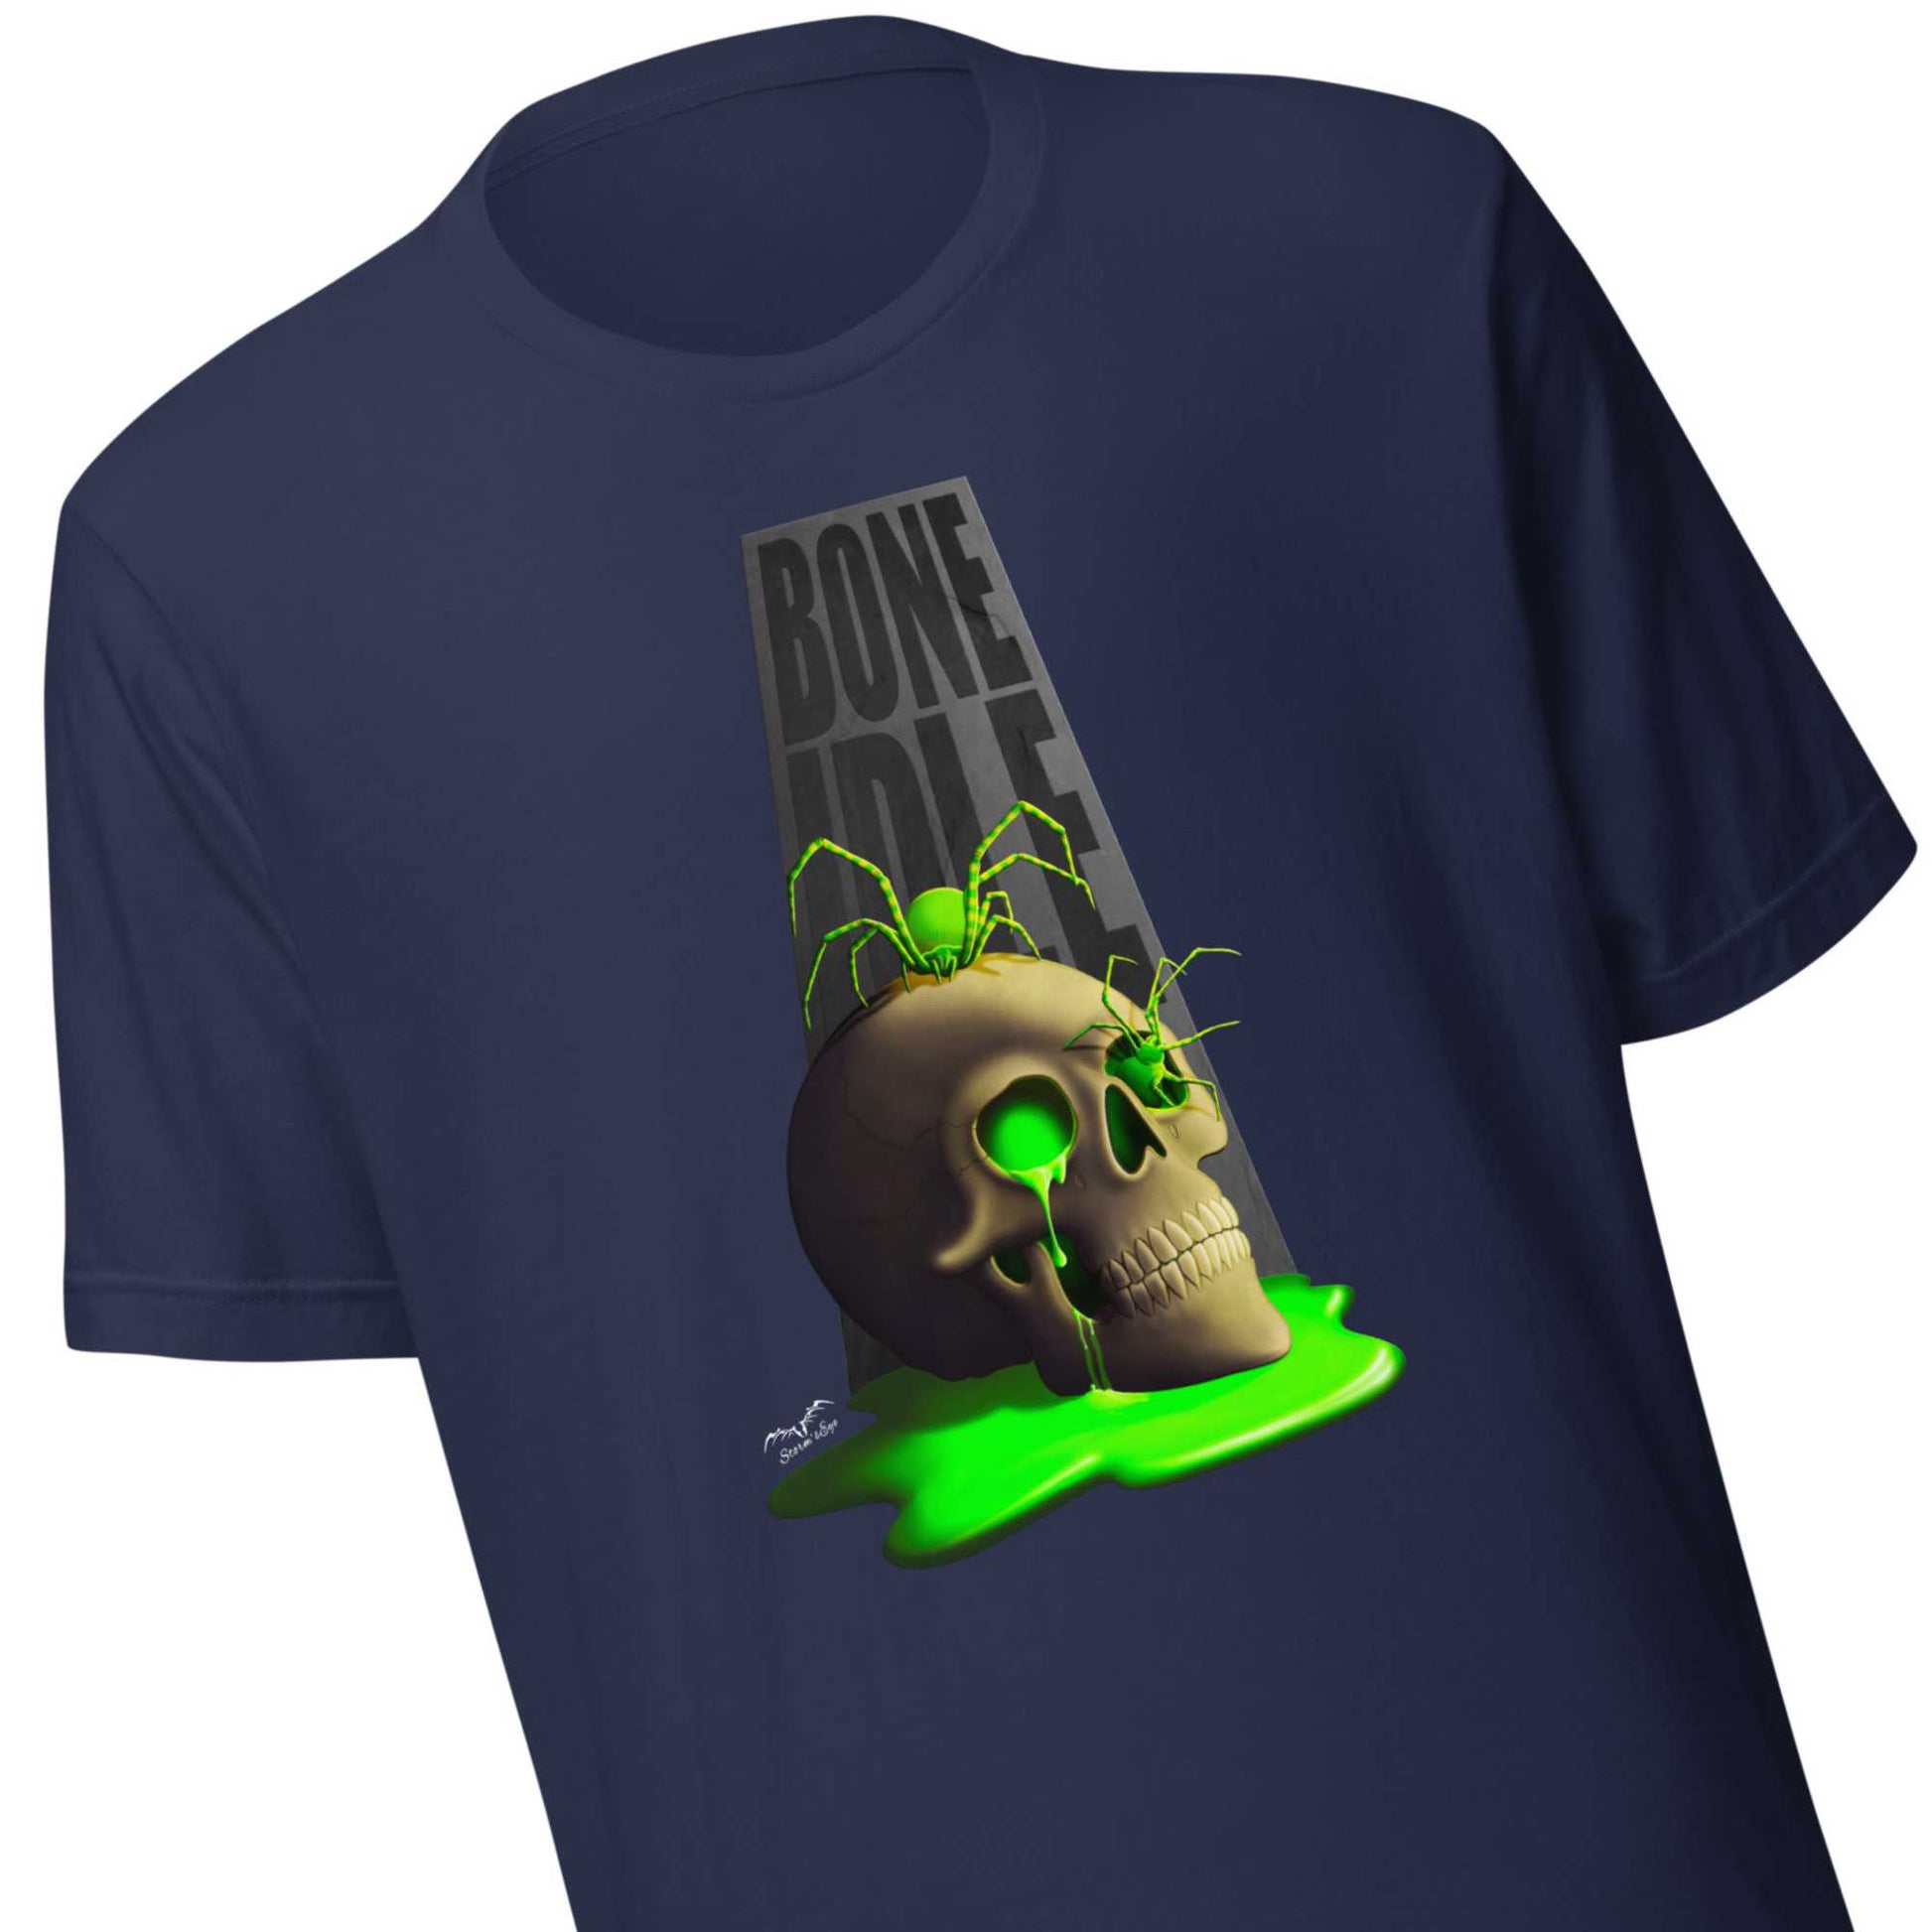 stormseye design bone idle skull and spiders T shirt detail view navy blue